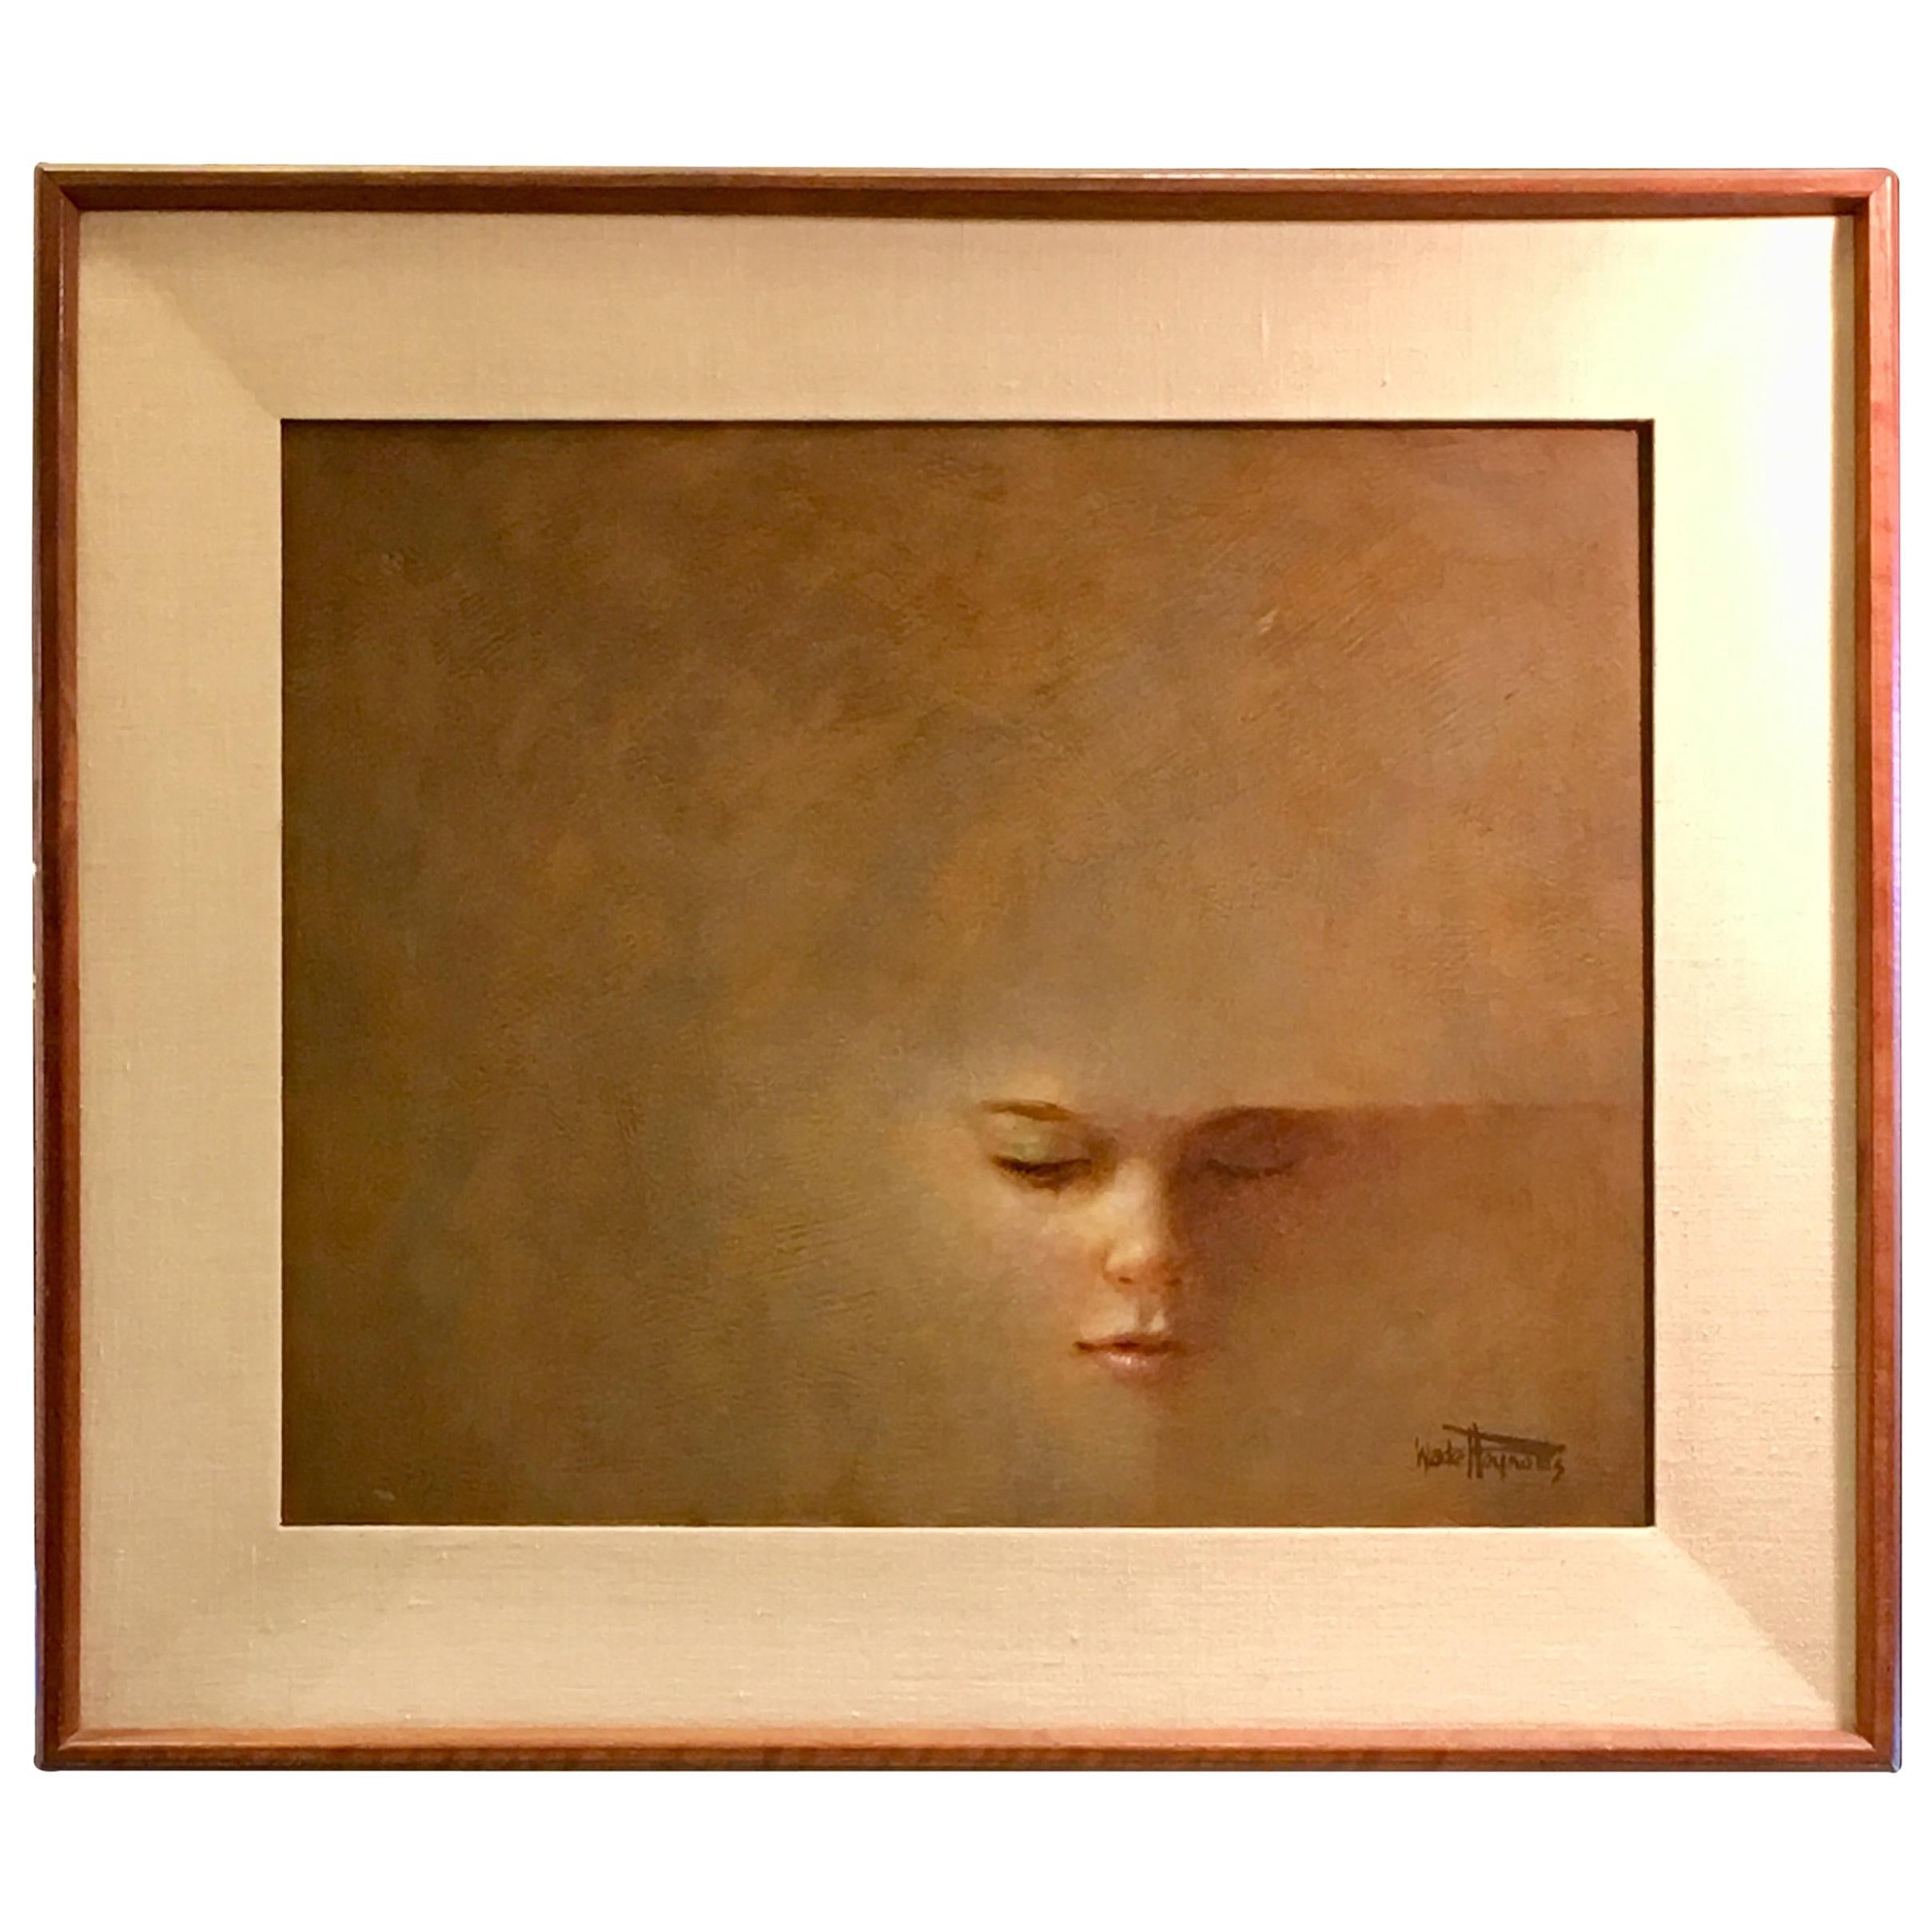 Original Wade Reynolds Mysterious Midcentury Oil Painting of a Girl's Face